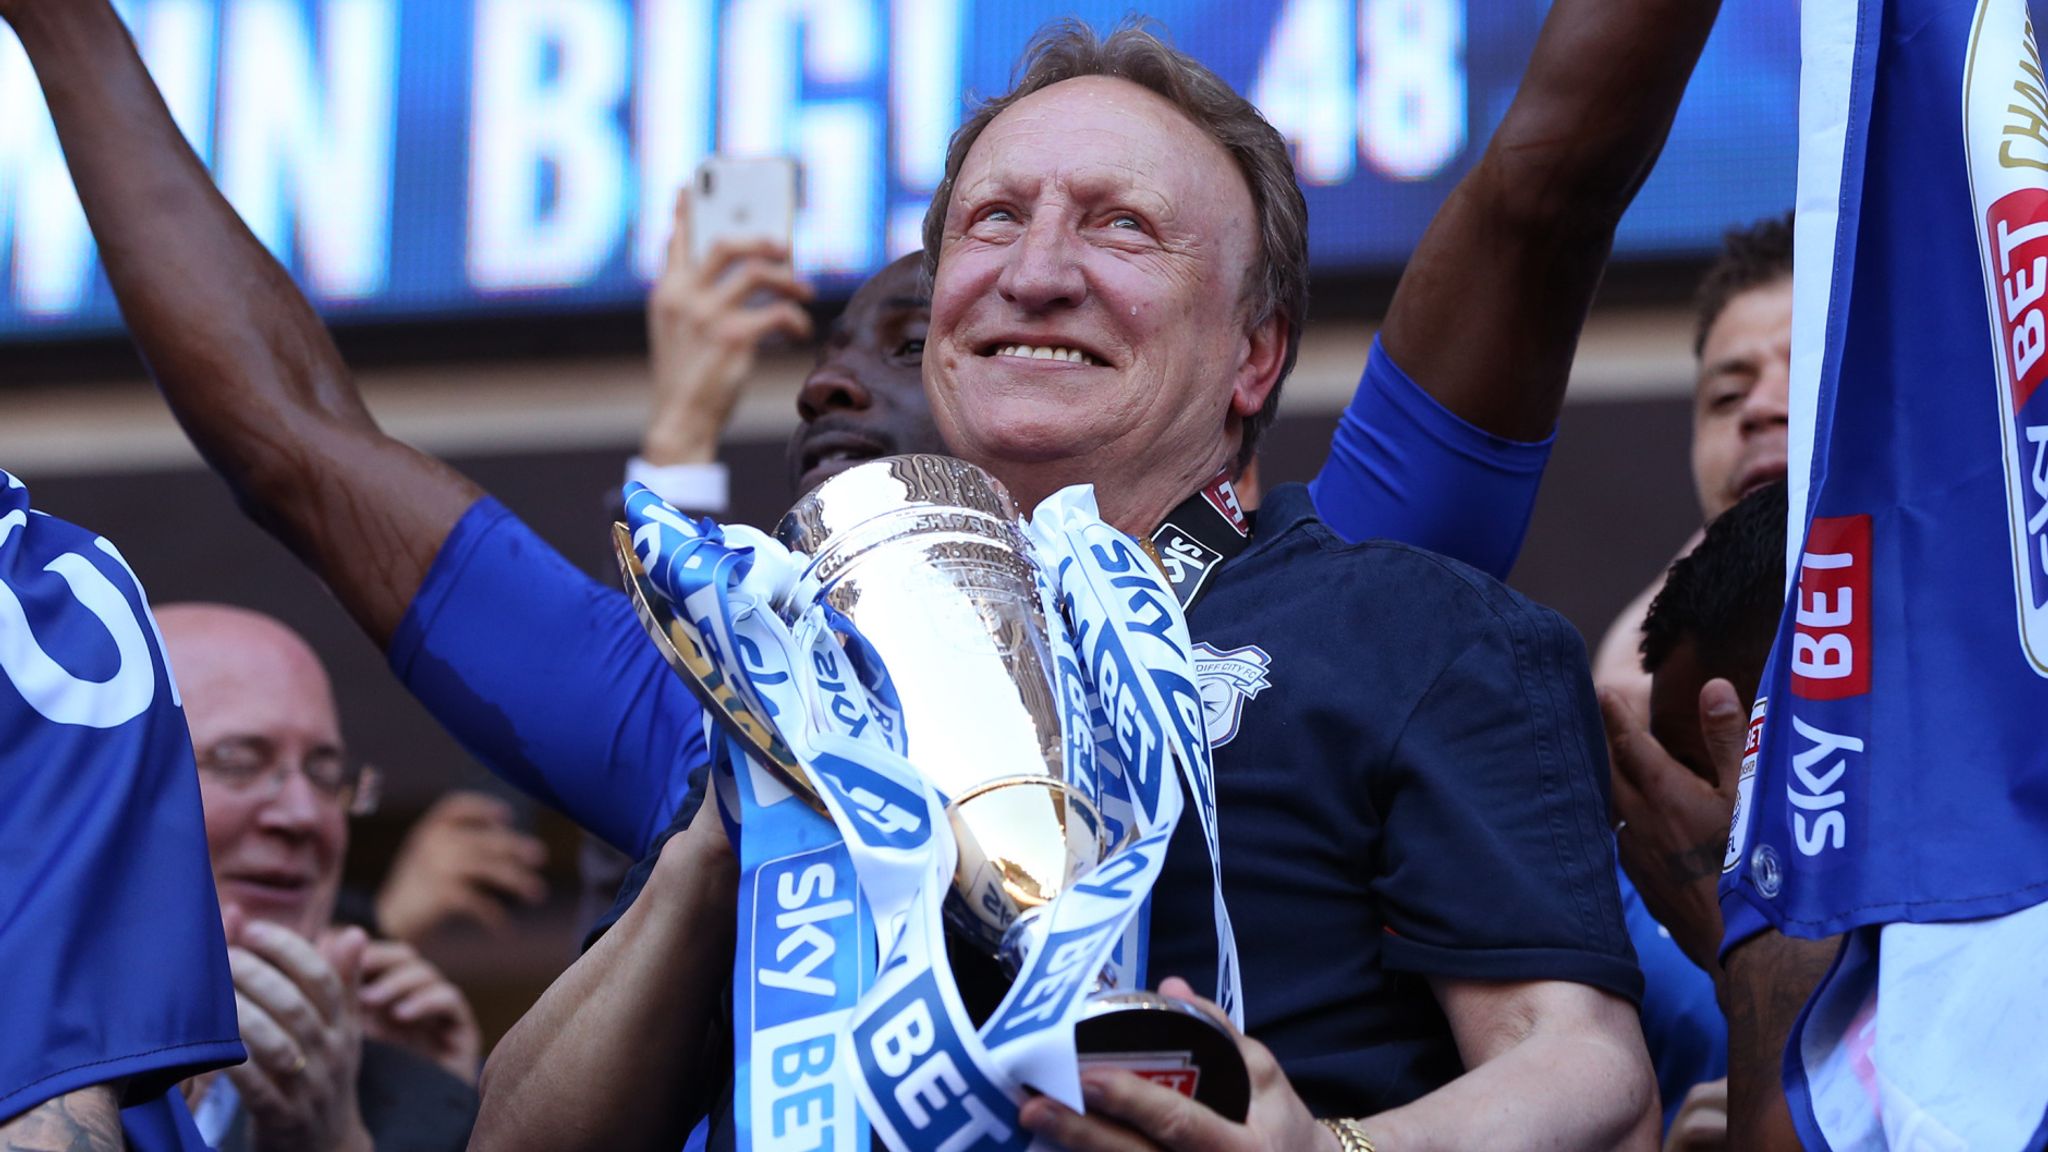 Cardiff City transfer news: Neil Warnock scores third signing in